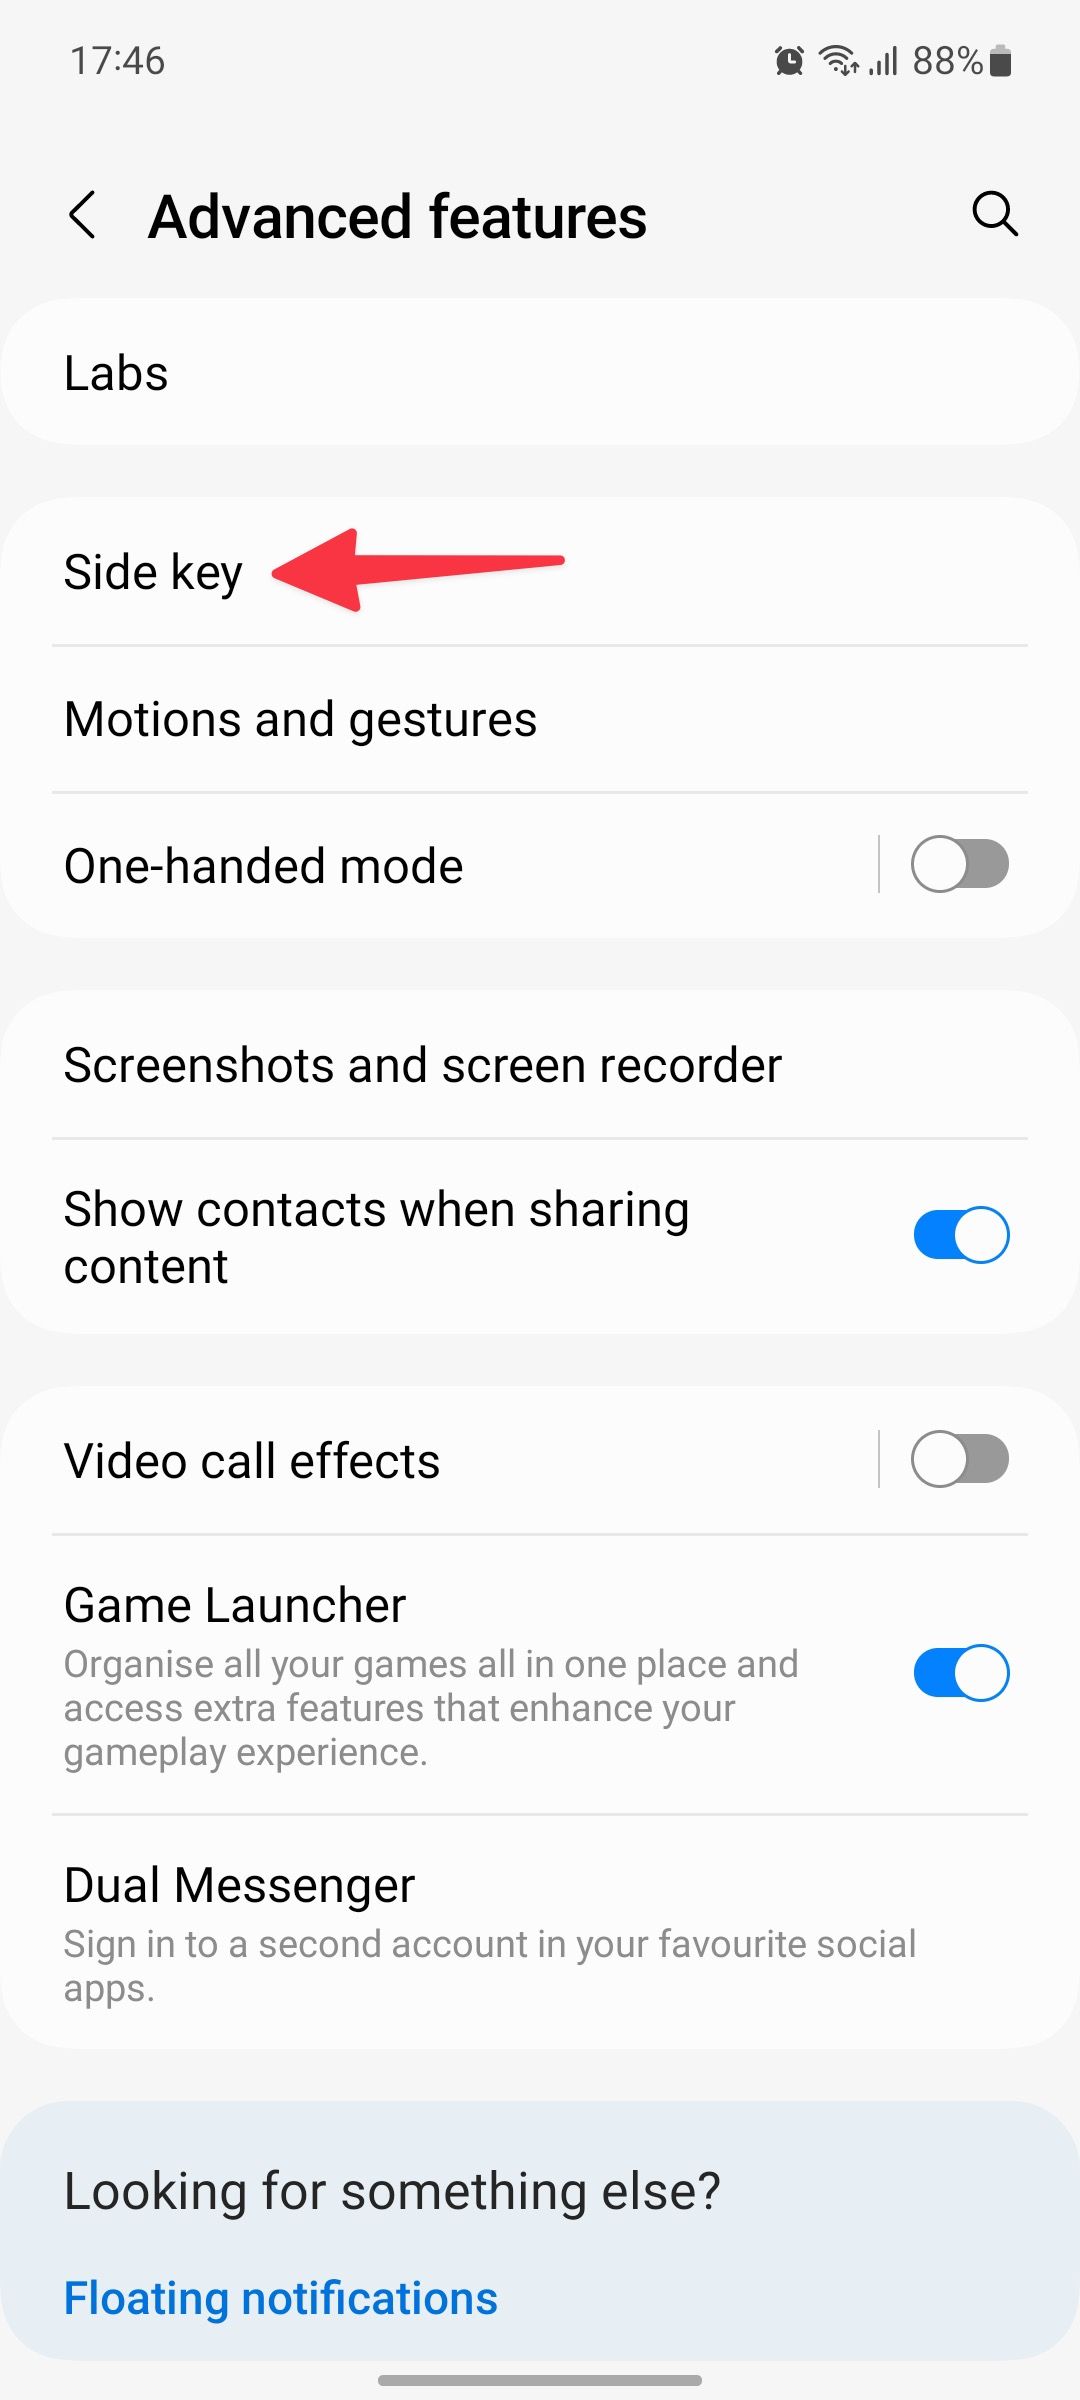 The Advanced features section in the Samsung Settings app with a red arrow pointing to the Side key option